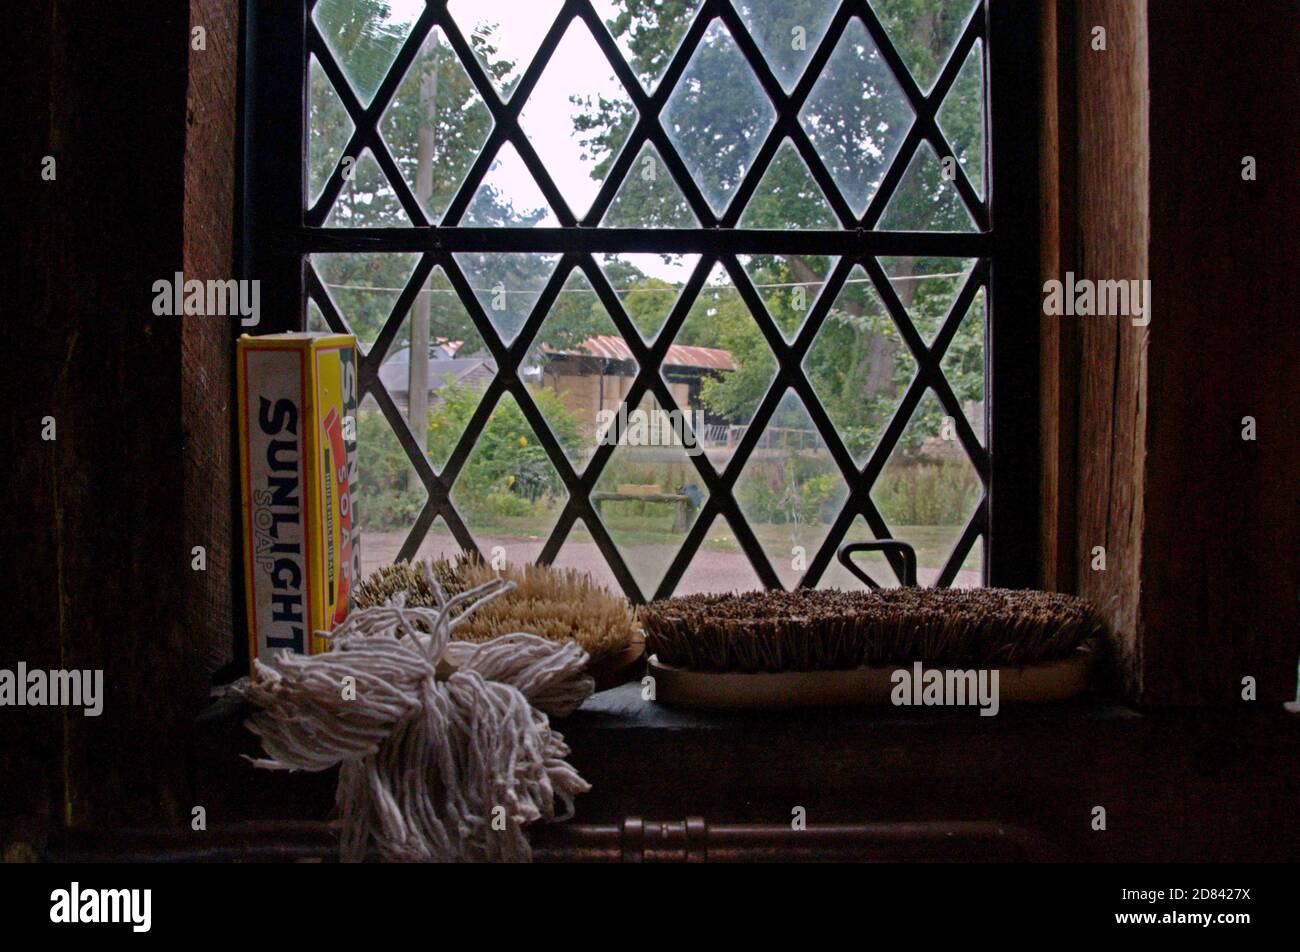 Vintage cleaning materials in the window of teh scullery at Brockhampton Medieval Manor House, Herefordshire, UK Stock Photo